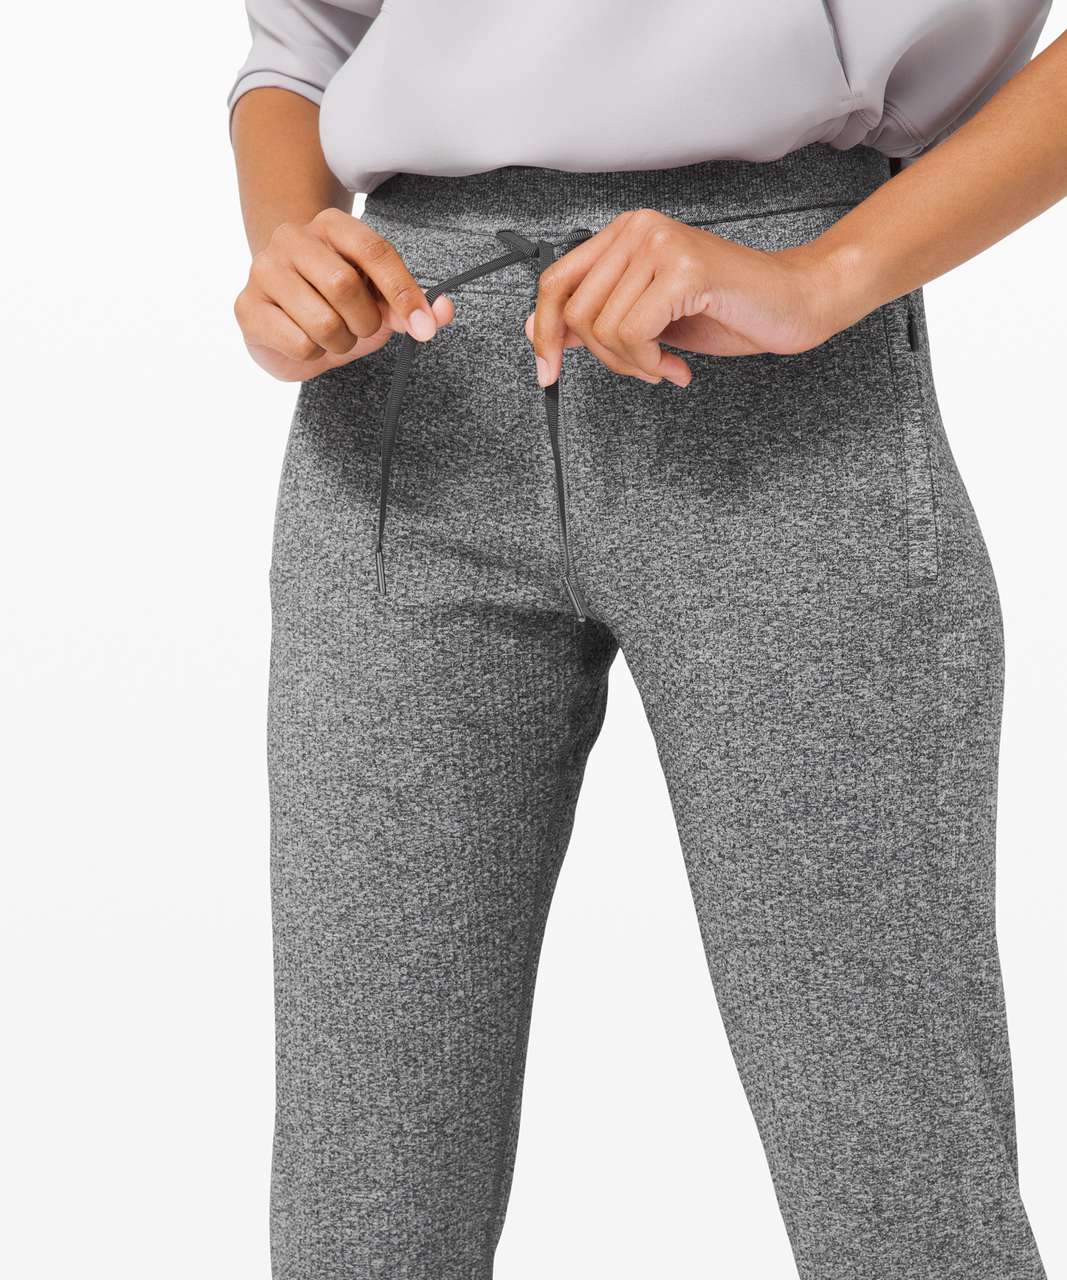 Lululemon Engineered Warmth Jogger Pants Knit Sage Size 4 - $109 - From Hope